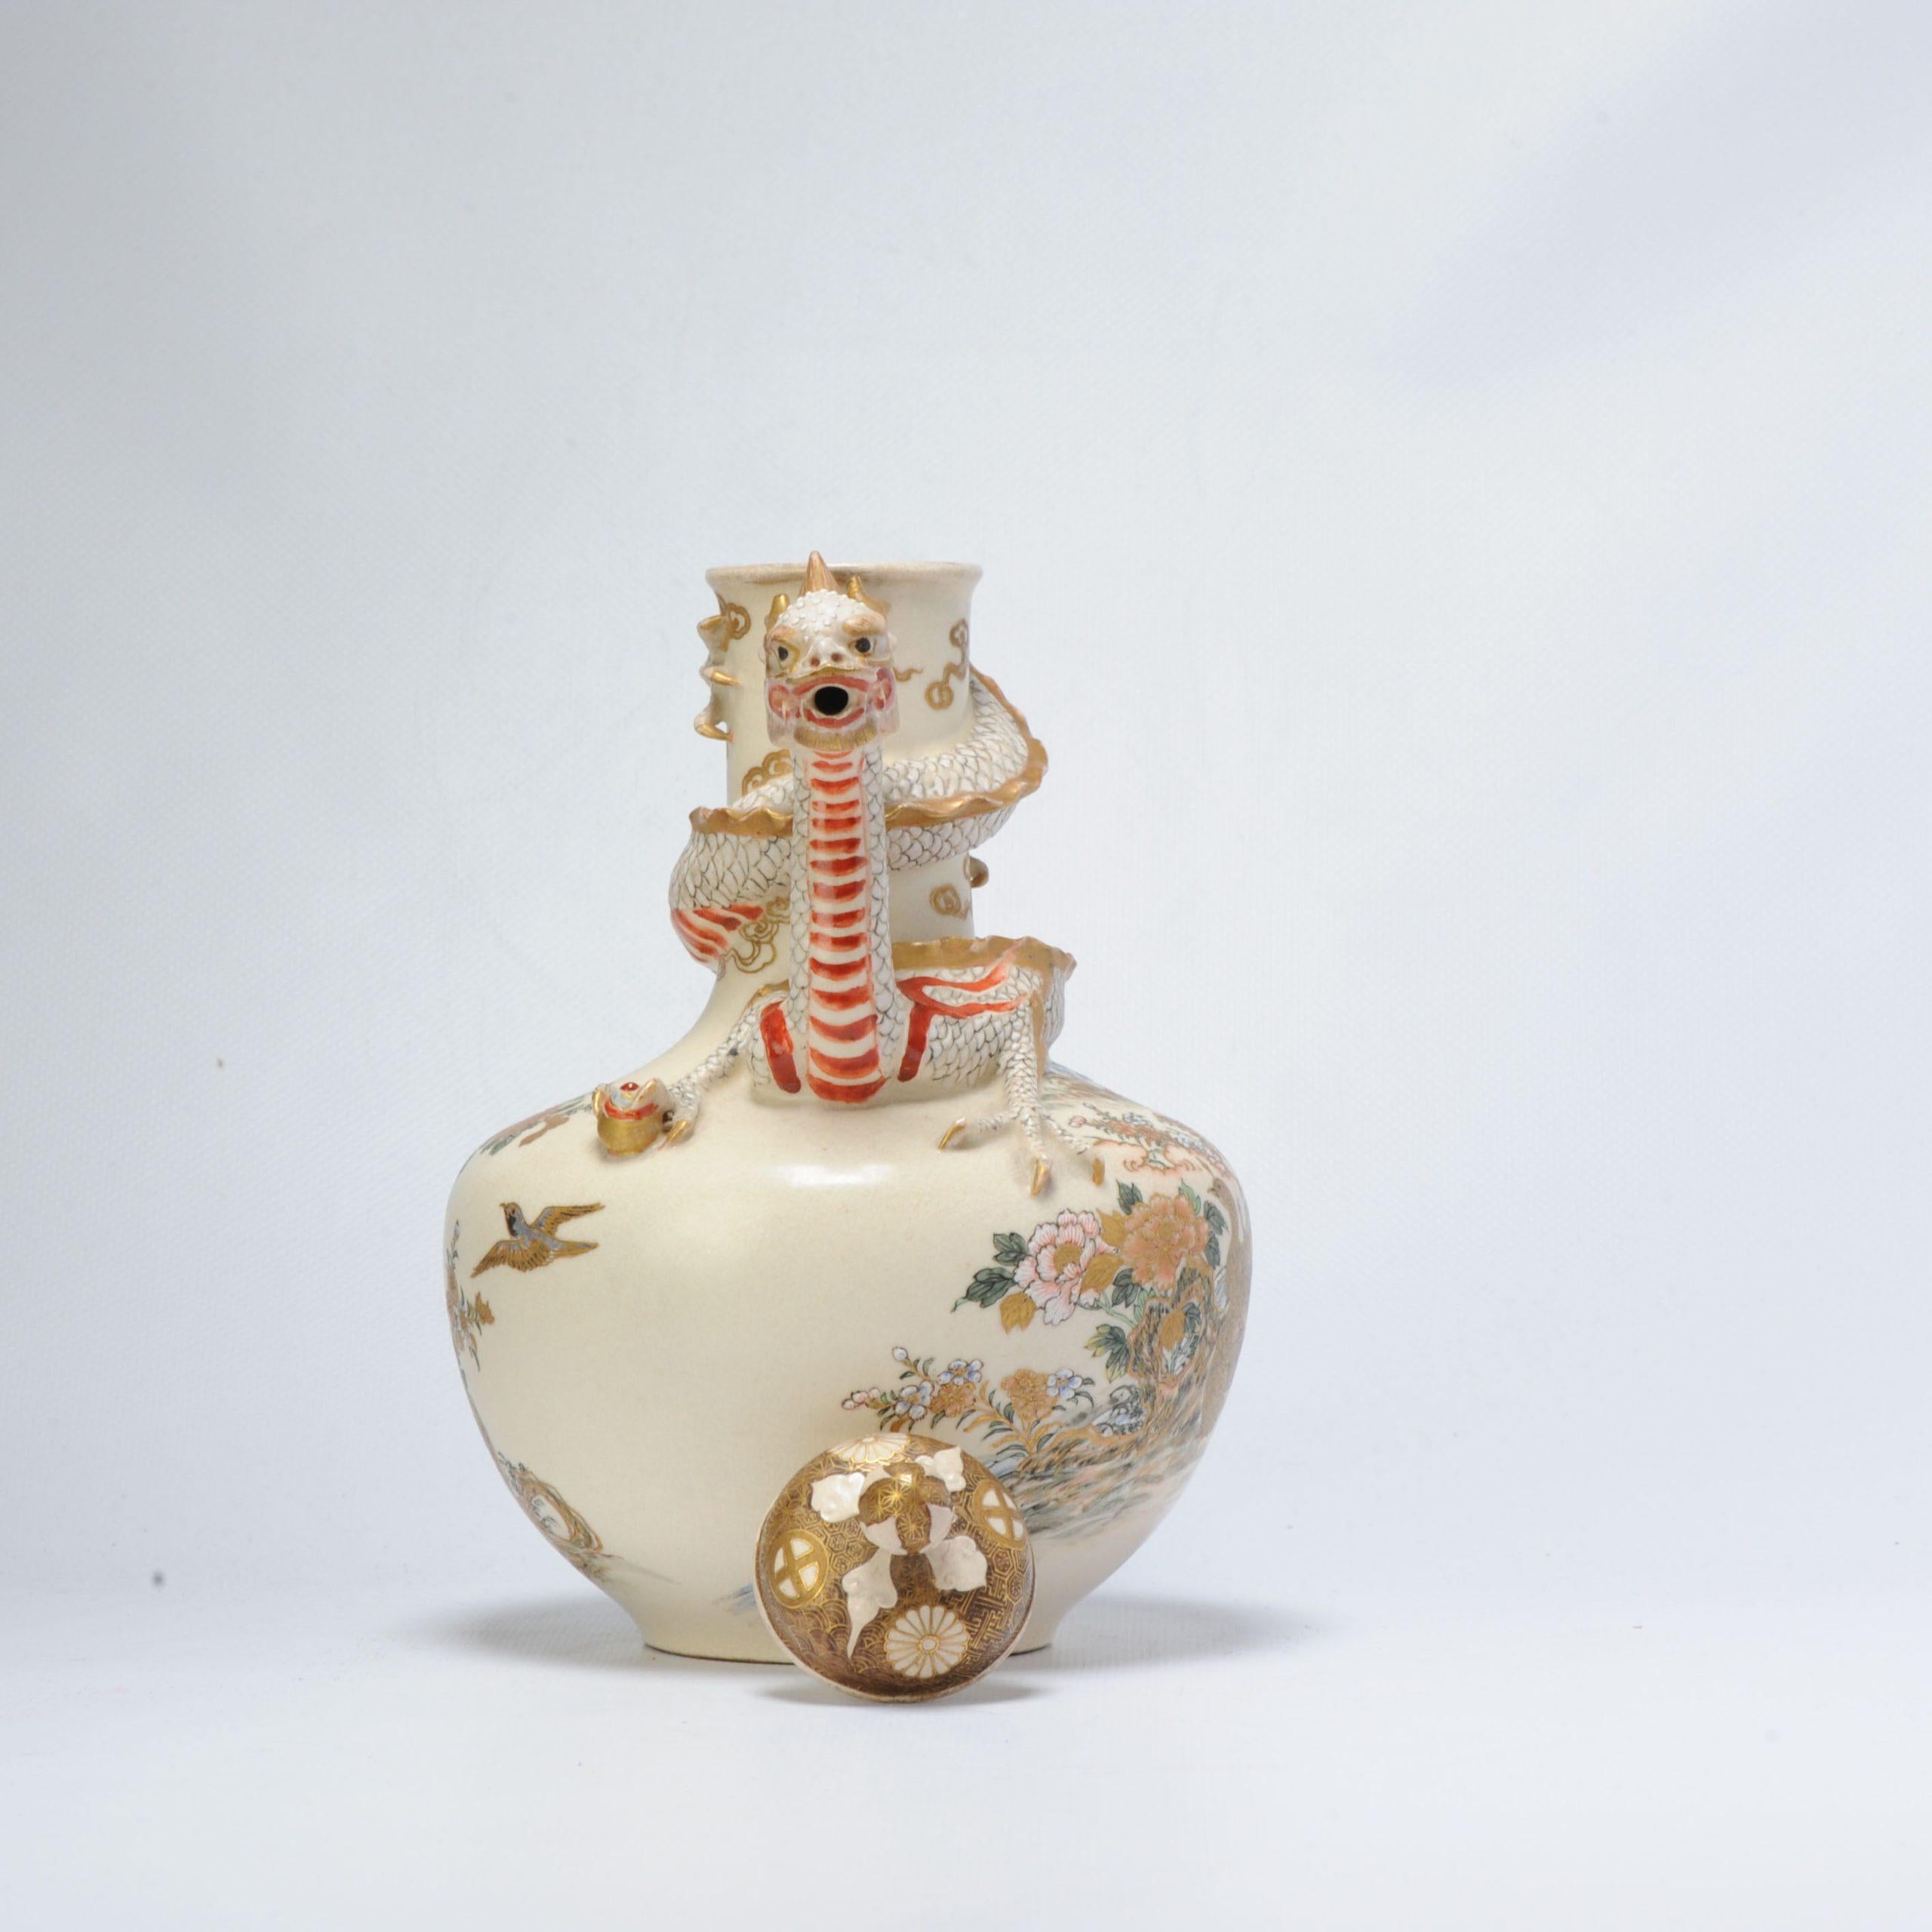 A japanese satsuma earthenware ewer and cover, of baluster shape, moulded with a dragon head spout and handle, the body painted with flowers, birds and 2 peacocks. marked:

Additional information:
Material: Porcelain & Pottery
Region of Origin: